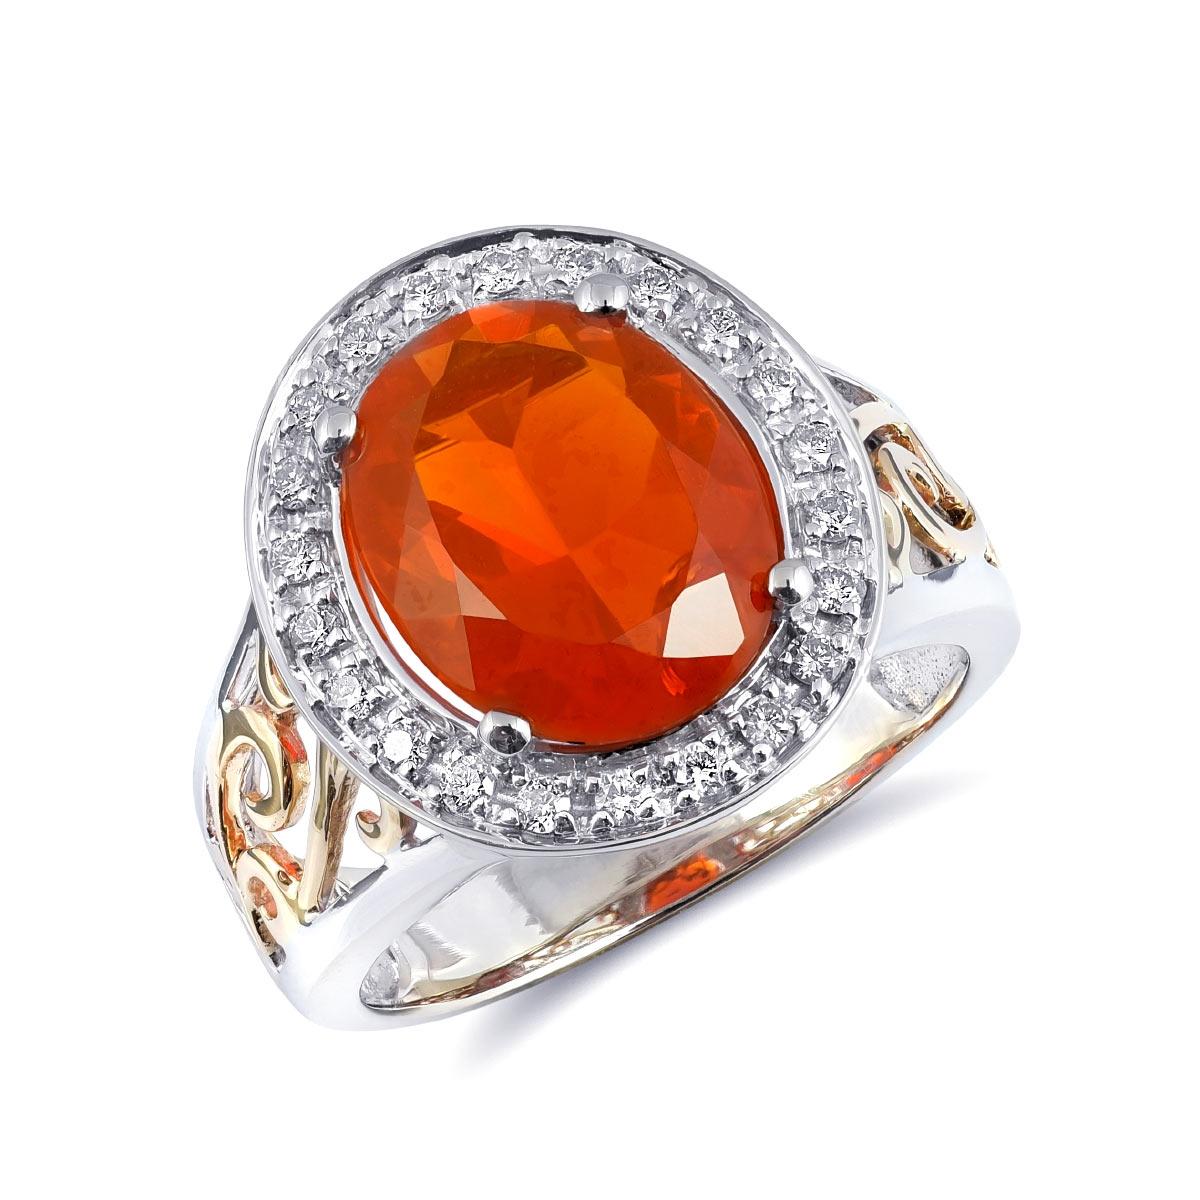 2.74 Carats Fire Opal Diamonds set in 14K White and Yellow Gold Ring In New Condition For Sale In Los Angeles, CA